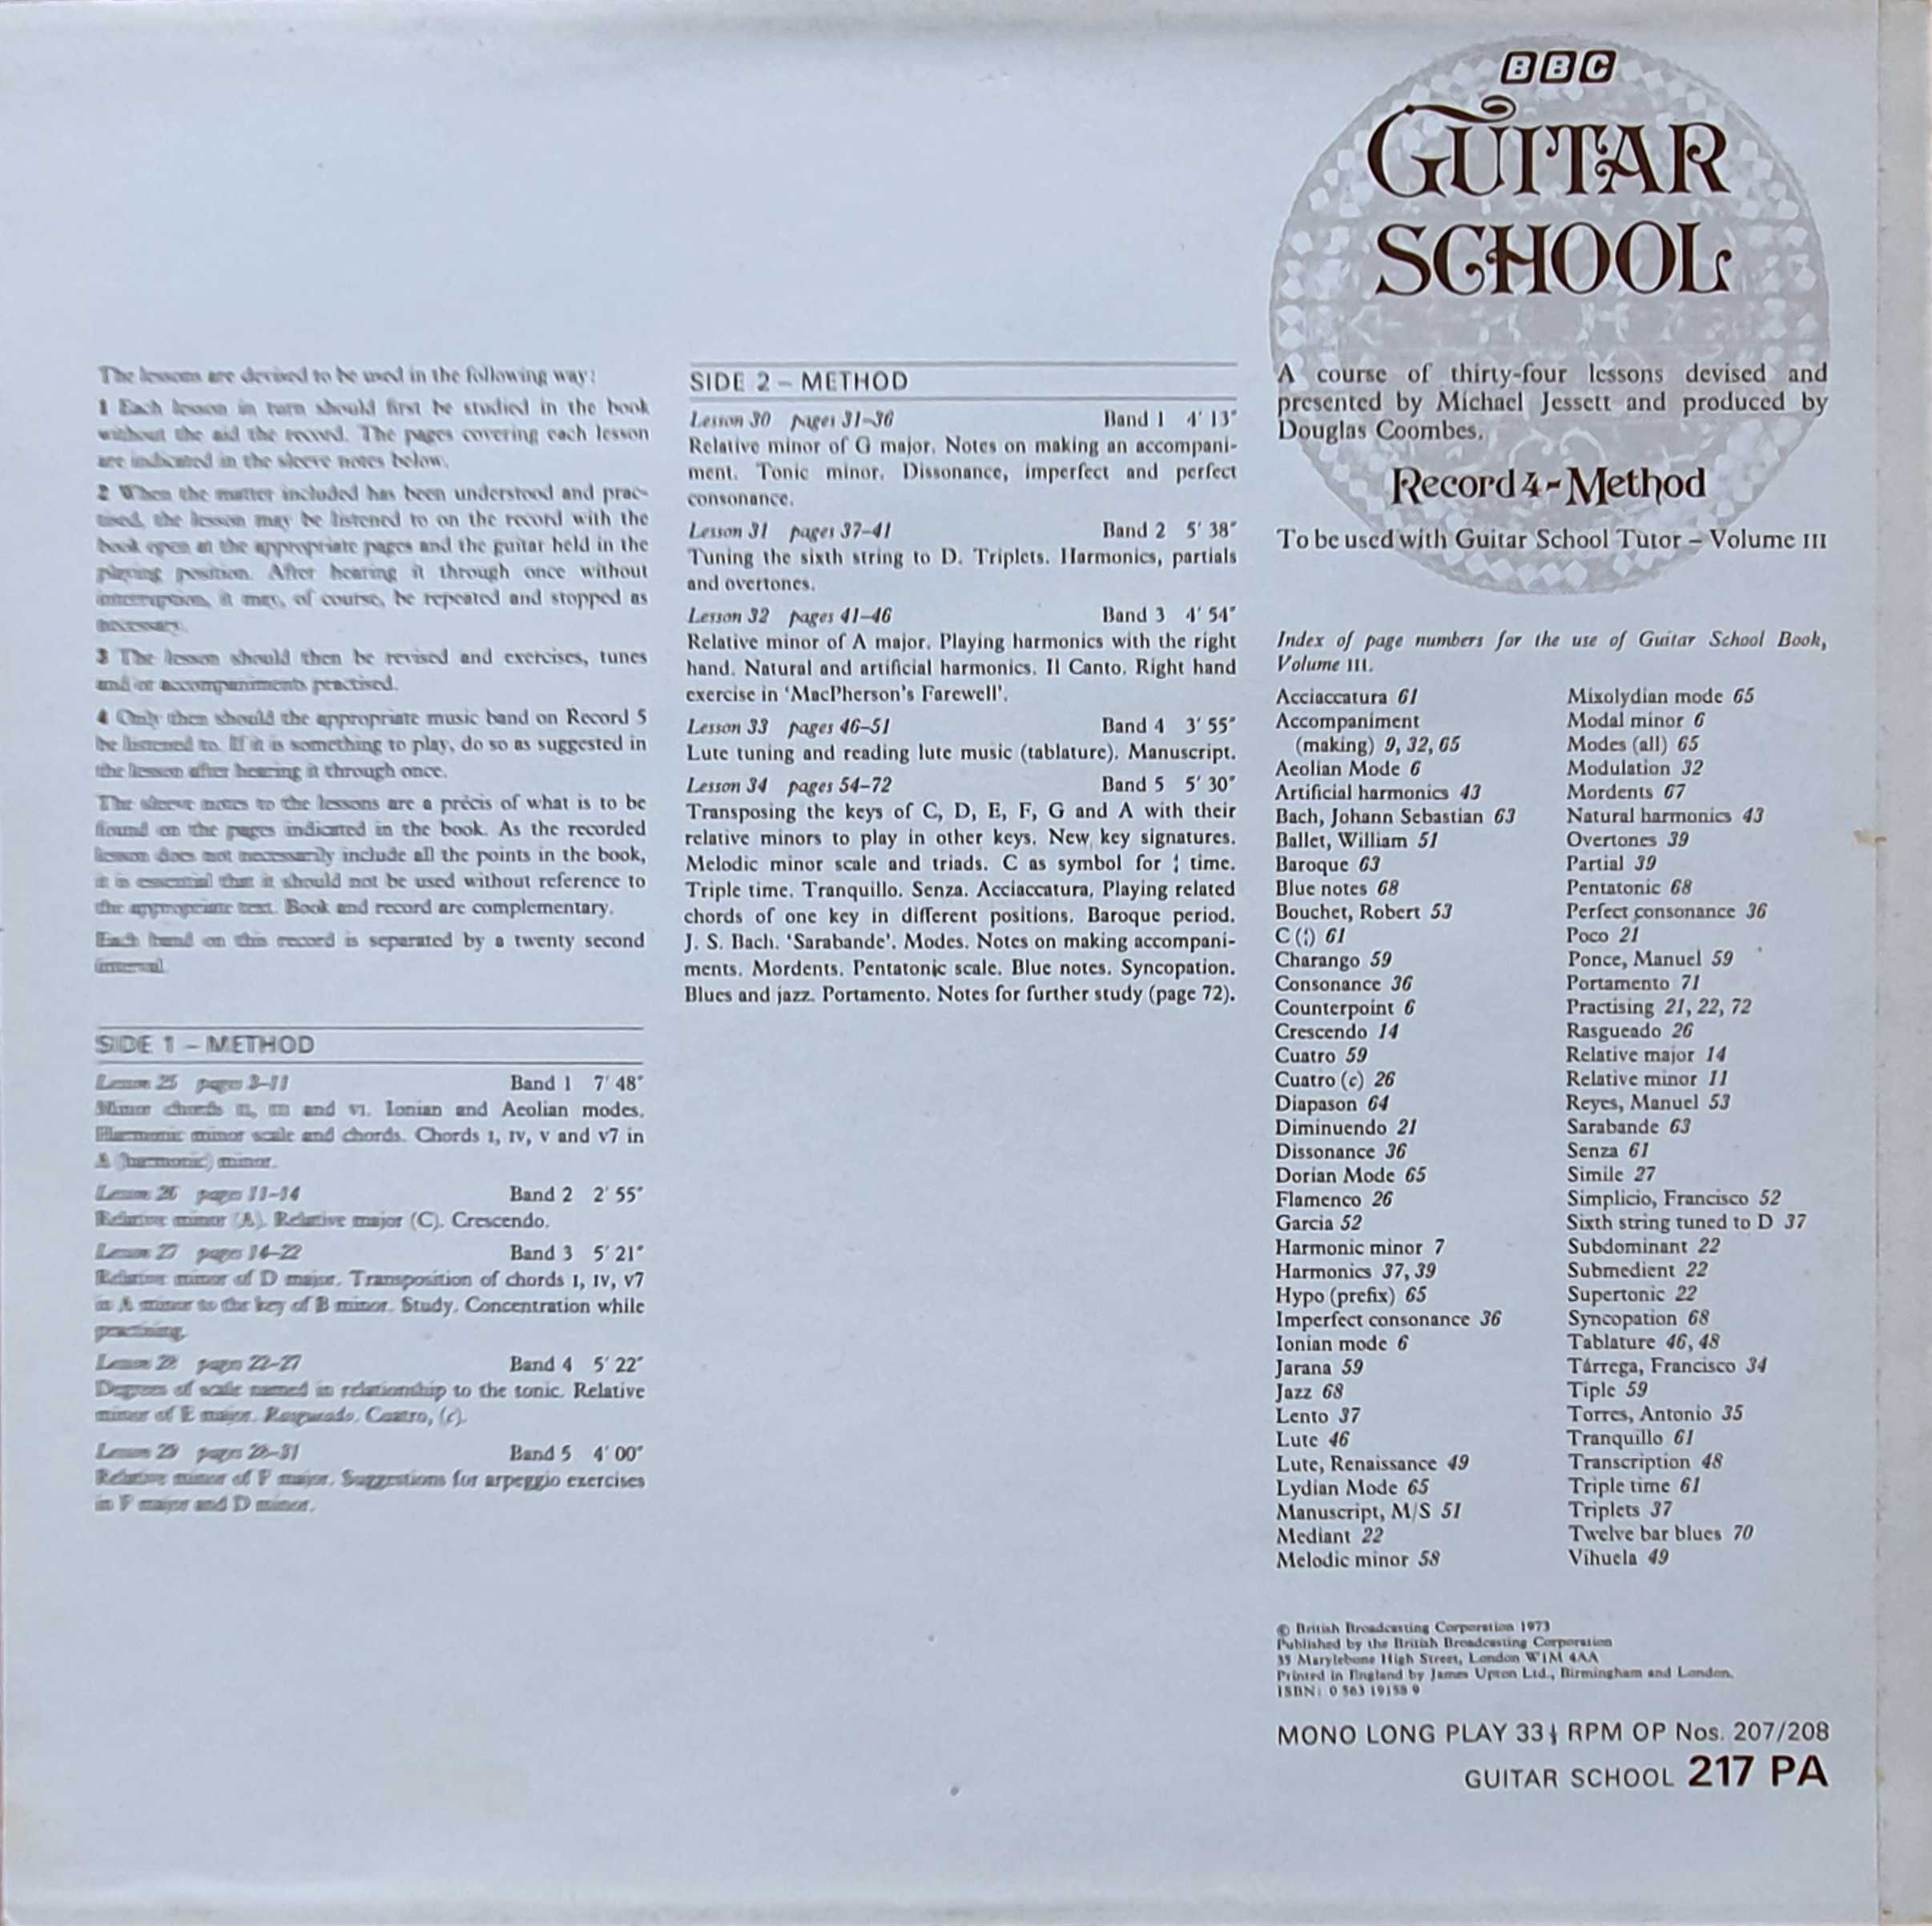 Picture of OP 207/208 Guitar school - Record 4 - Method by artist Michael Jessett from the BBC records and Tapes library